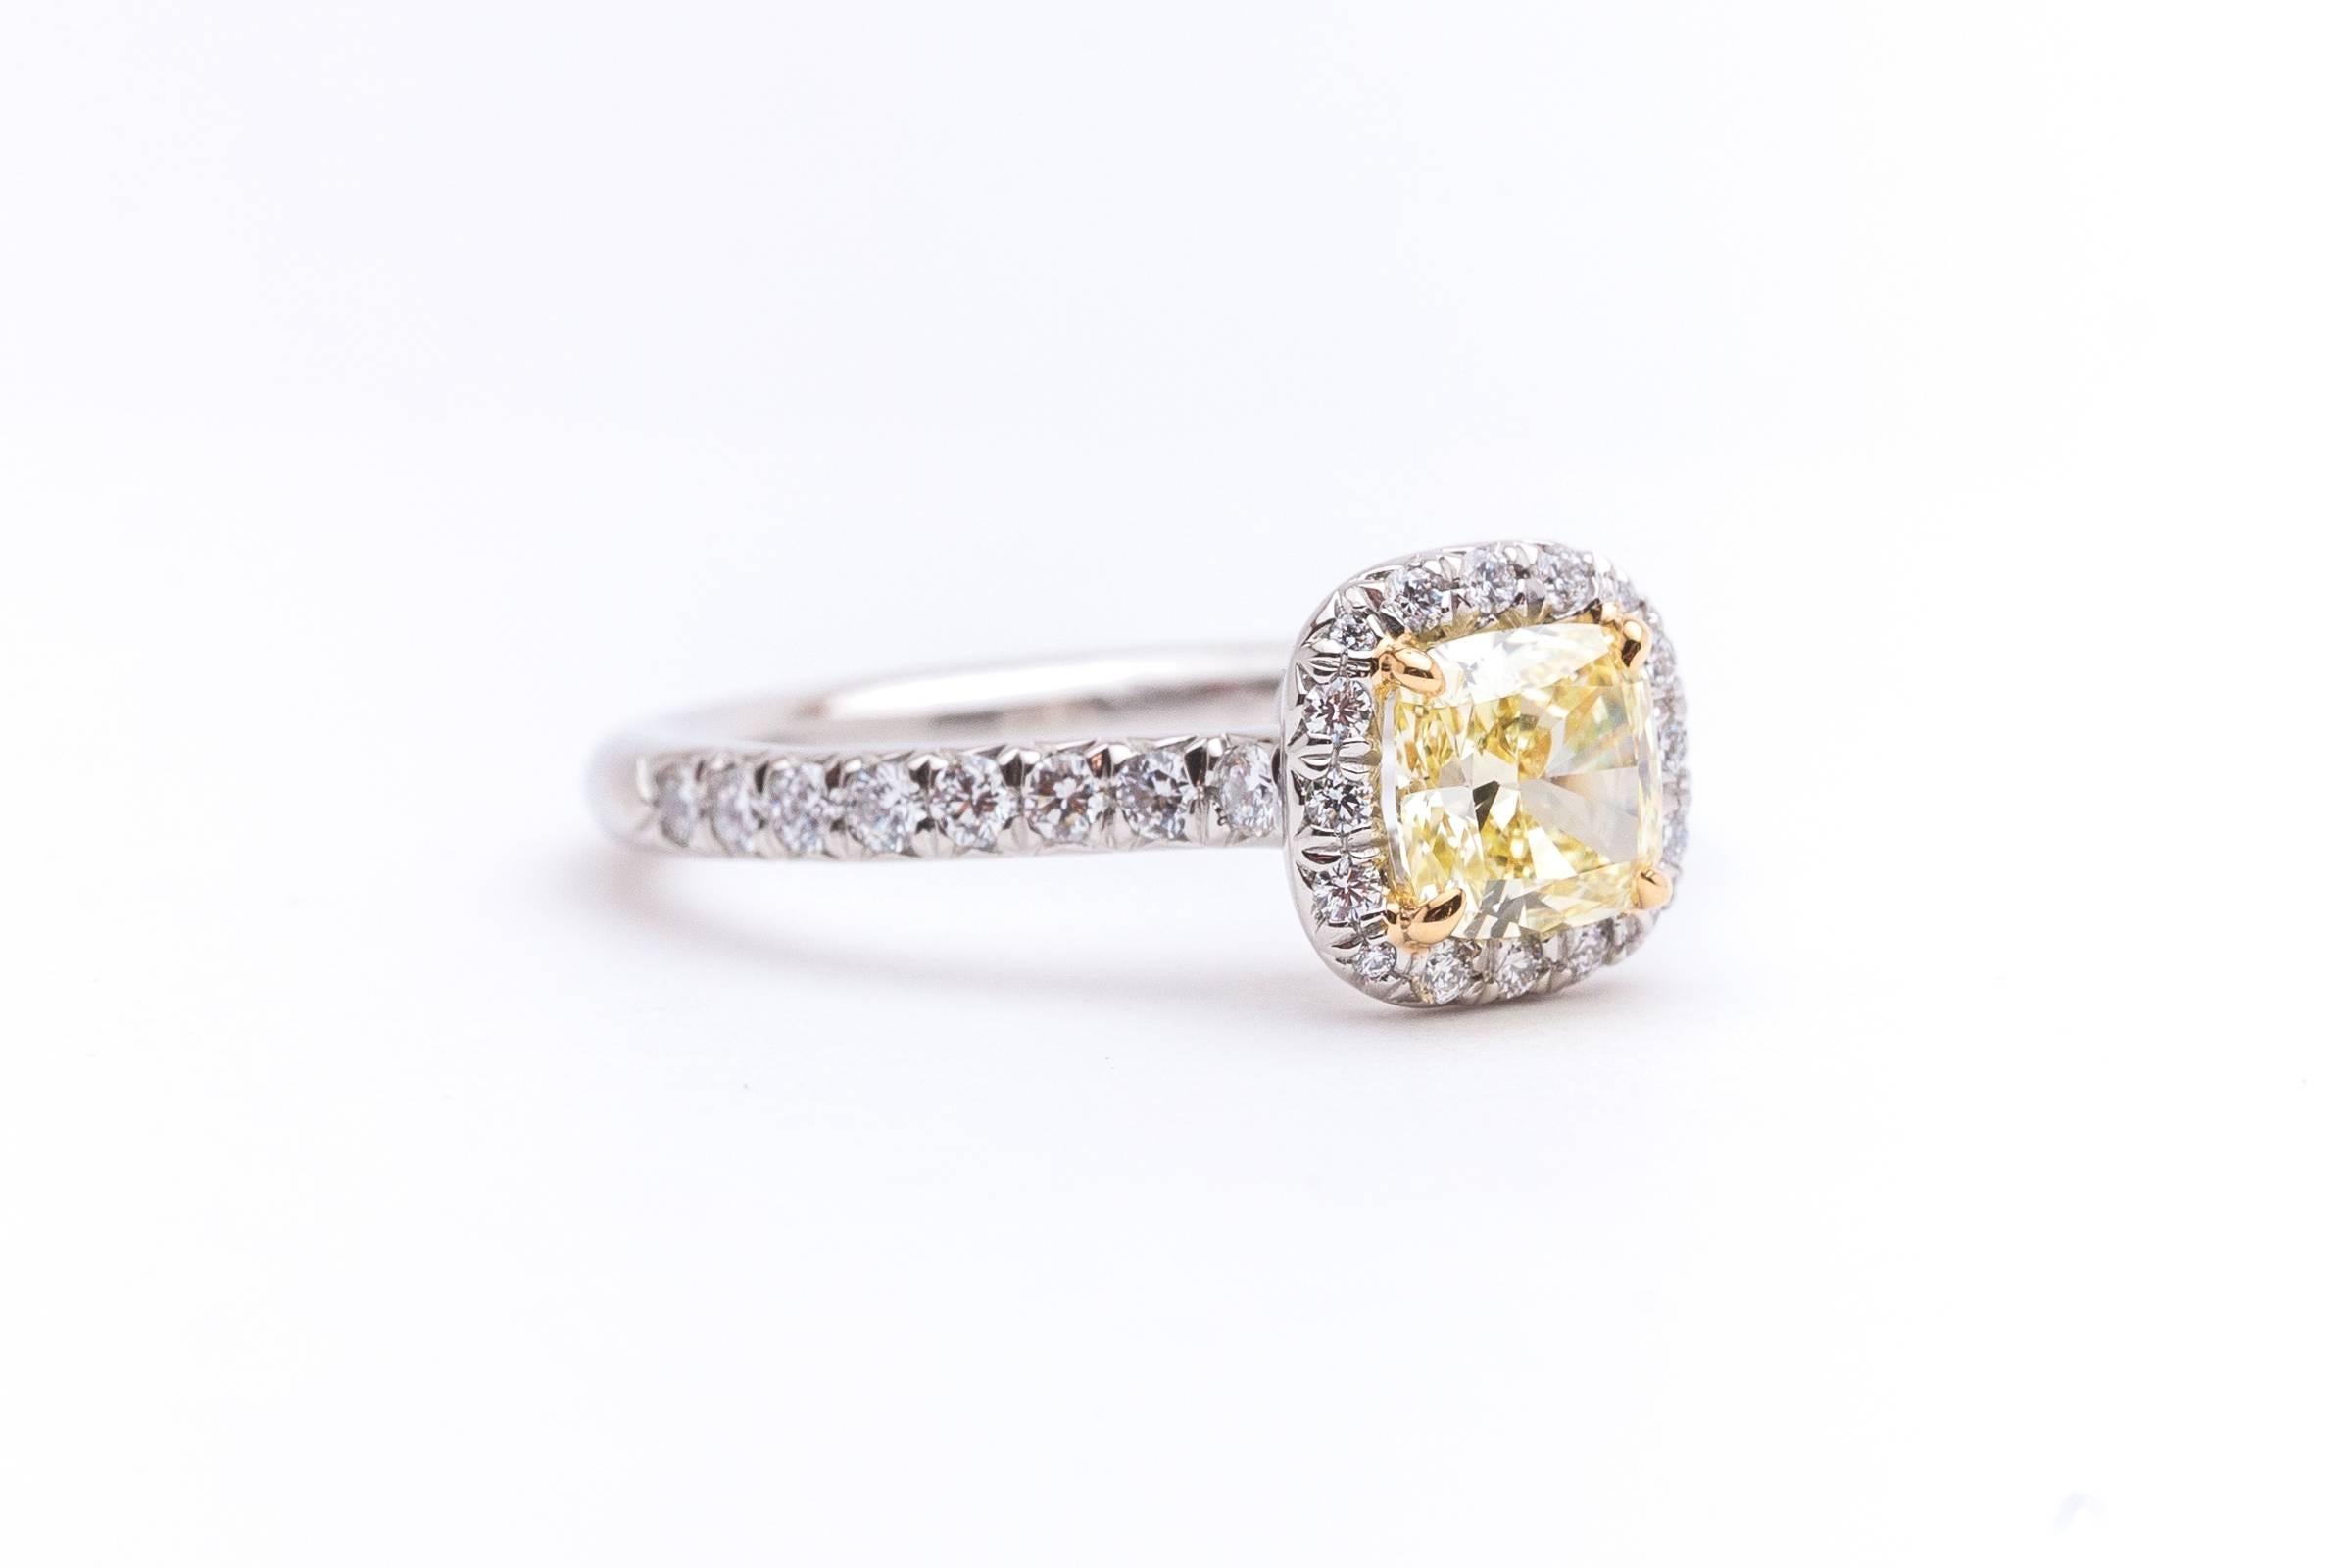 Beacon Hill Jewelers Presents:

A Tiffany & Co. Soleste engagement ring featuring a Fancy Yellow diamond center stone. Crafted in platinum and 18 karat yellow gold this ring features a Fancy Intense Yellow center diamond framed by pave set